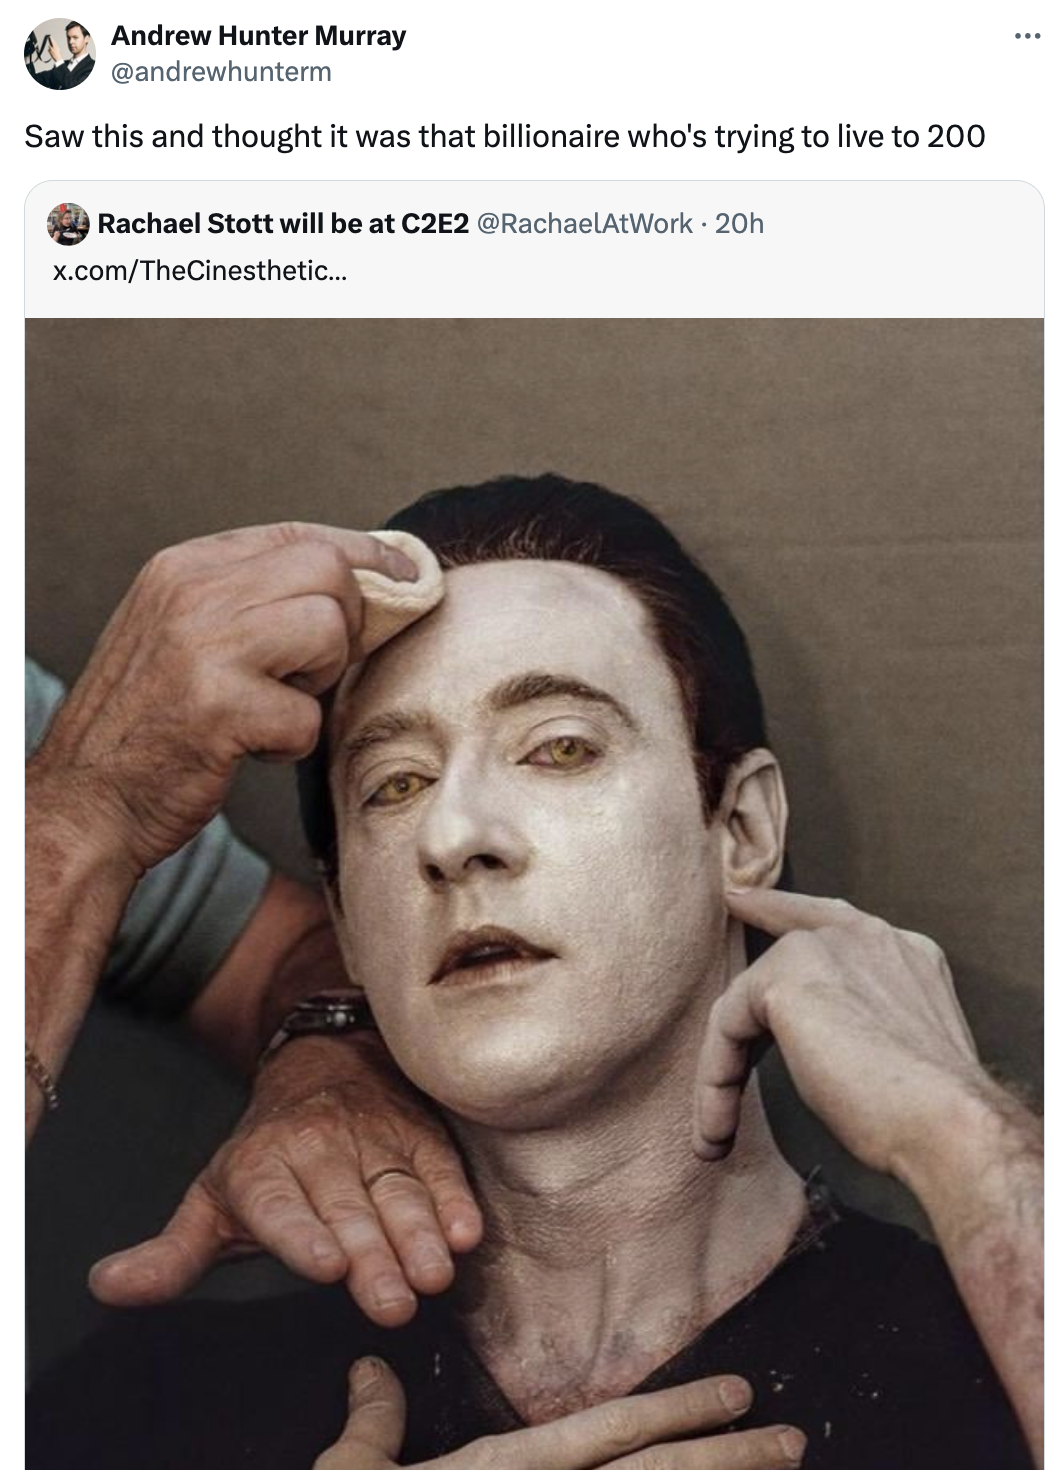 r accidentalrenaissance - Andrew Hunter Murray Saw this and thought it was that billionaire who's trying to live to 200 Rachael Stott will be at C2E2 20h x.comTheCinesthetic...